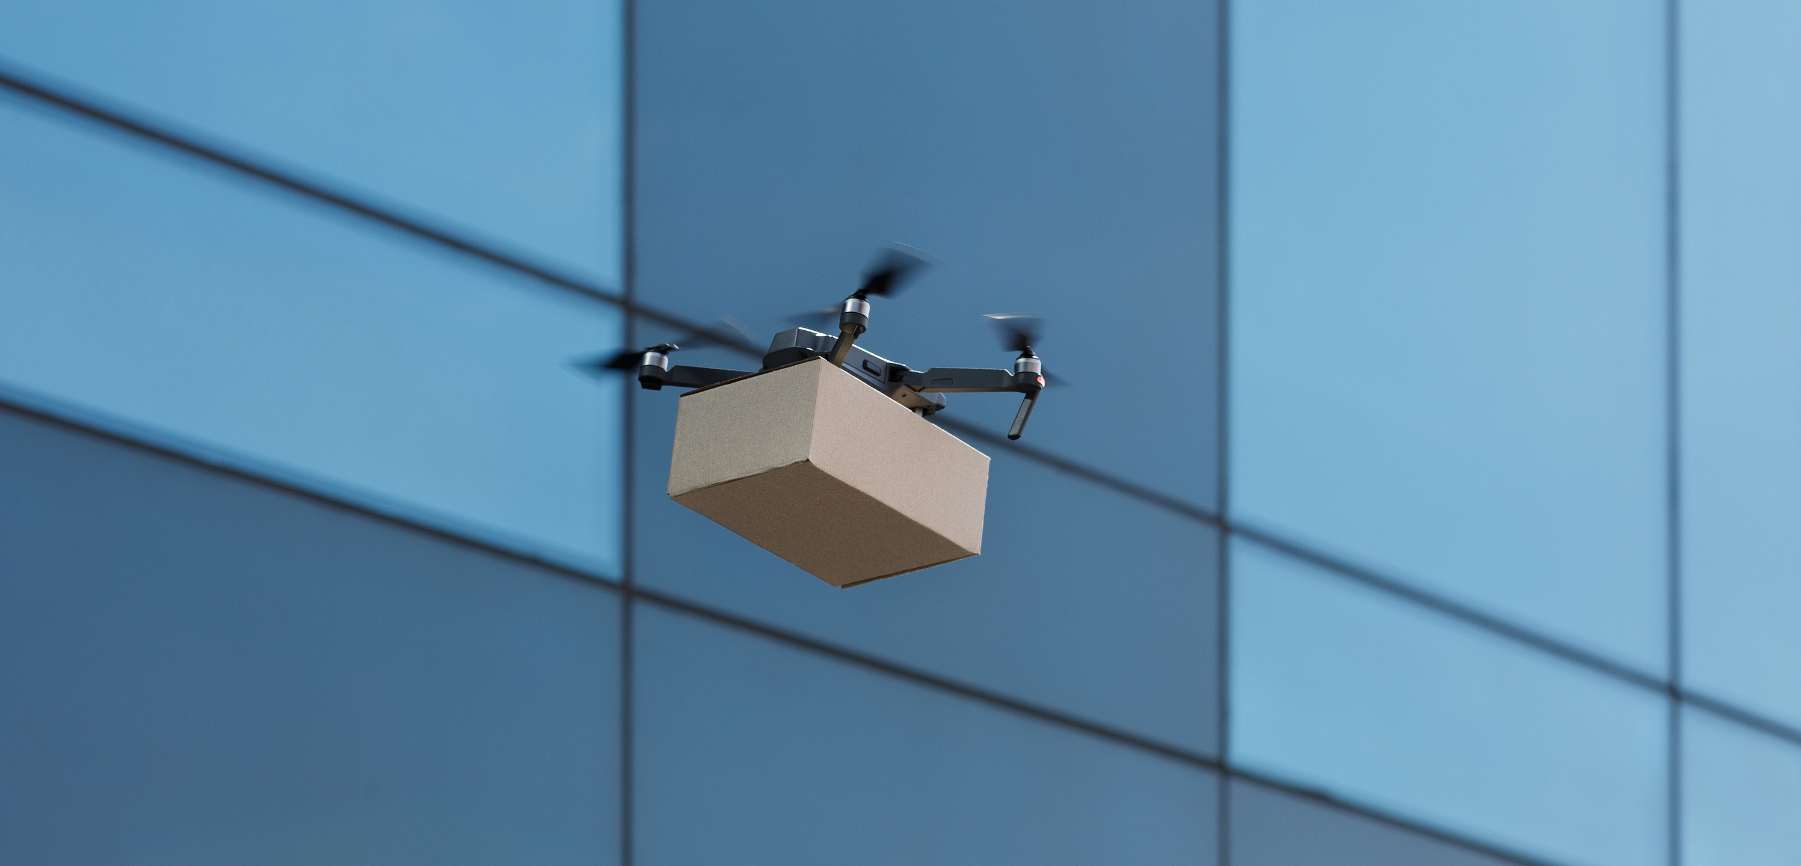 Quadrocopter delivering parcel by air in the city